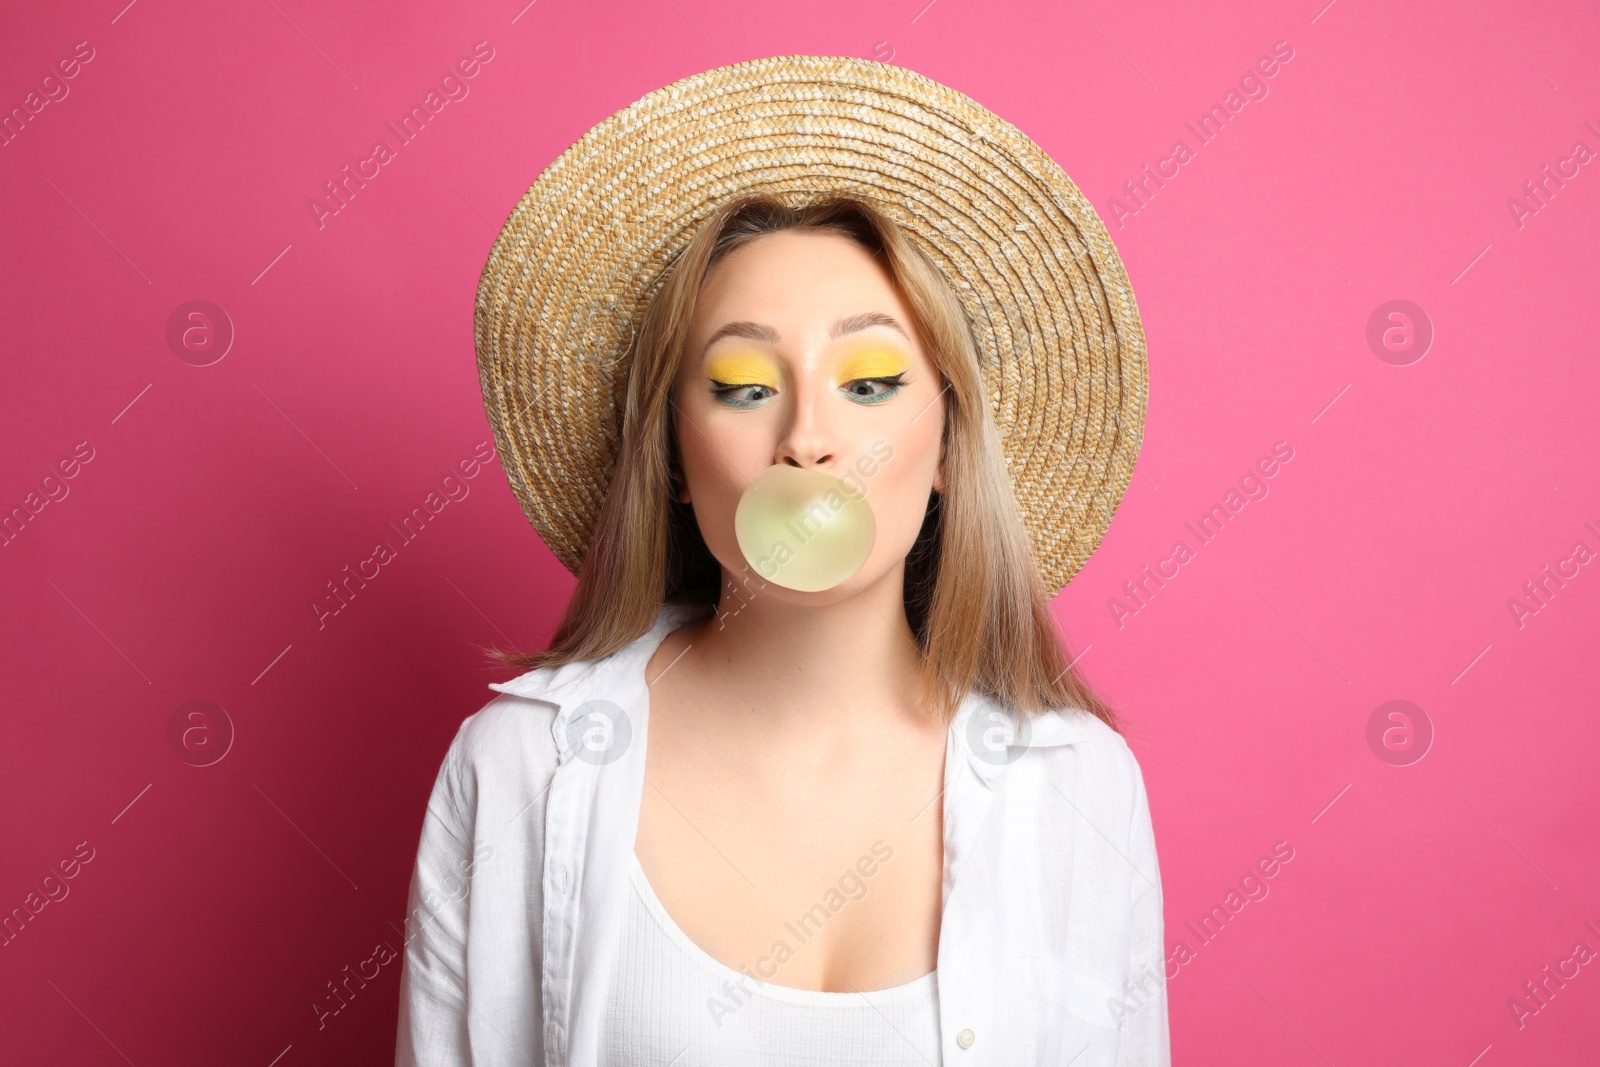 Photo of Fashionable young woman with bright makeup blowing bubblegum on pink background